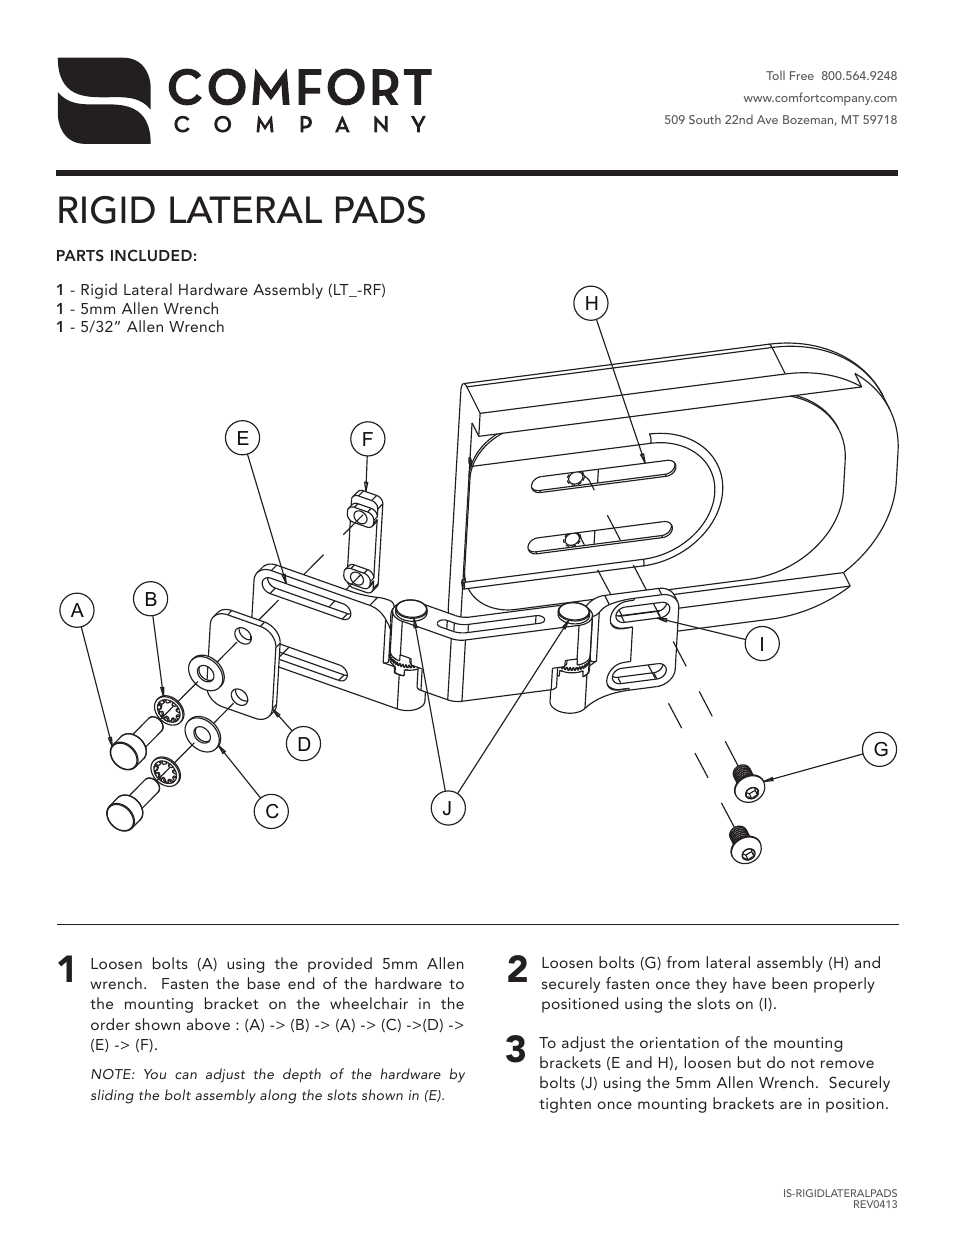 Rigid Lateral Pads